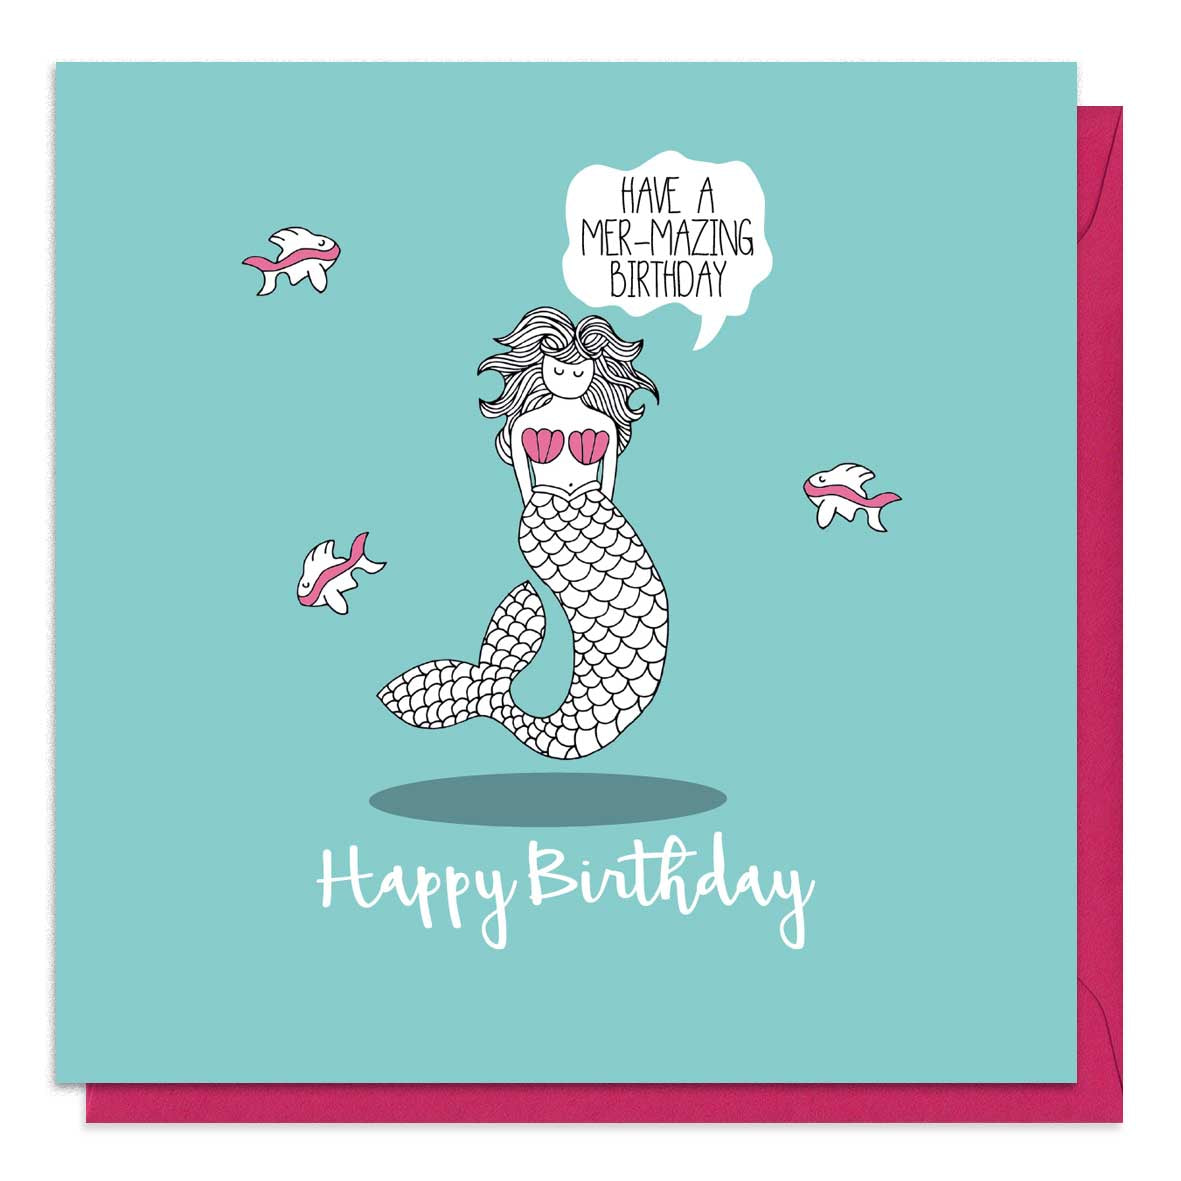 Turquoise birthday card with an illustration of a mermaid